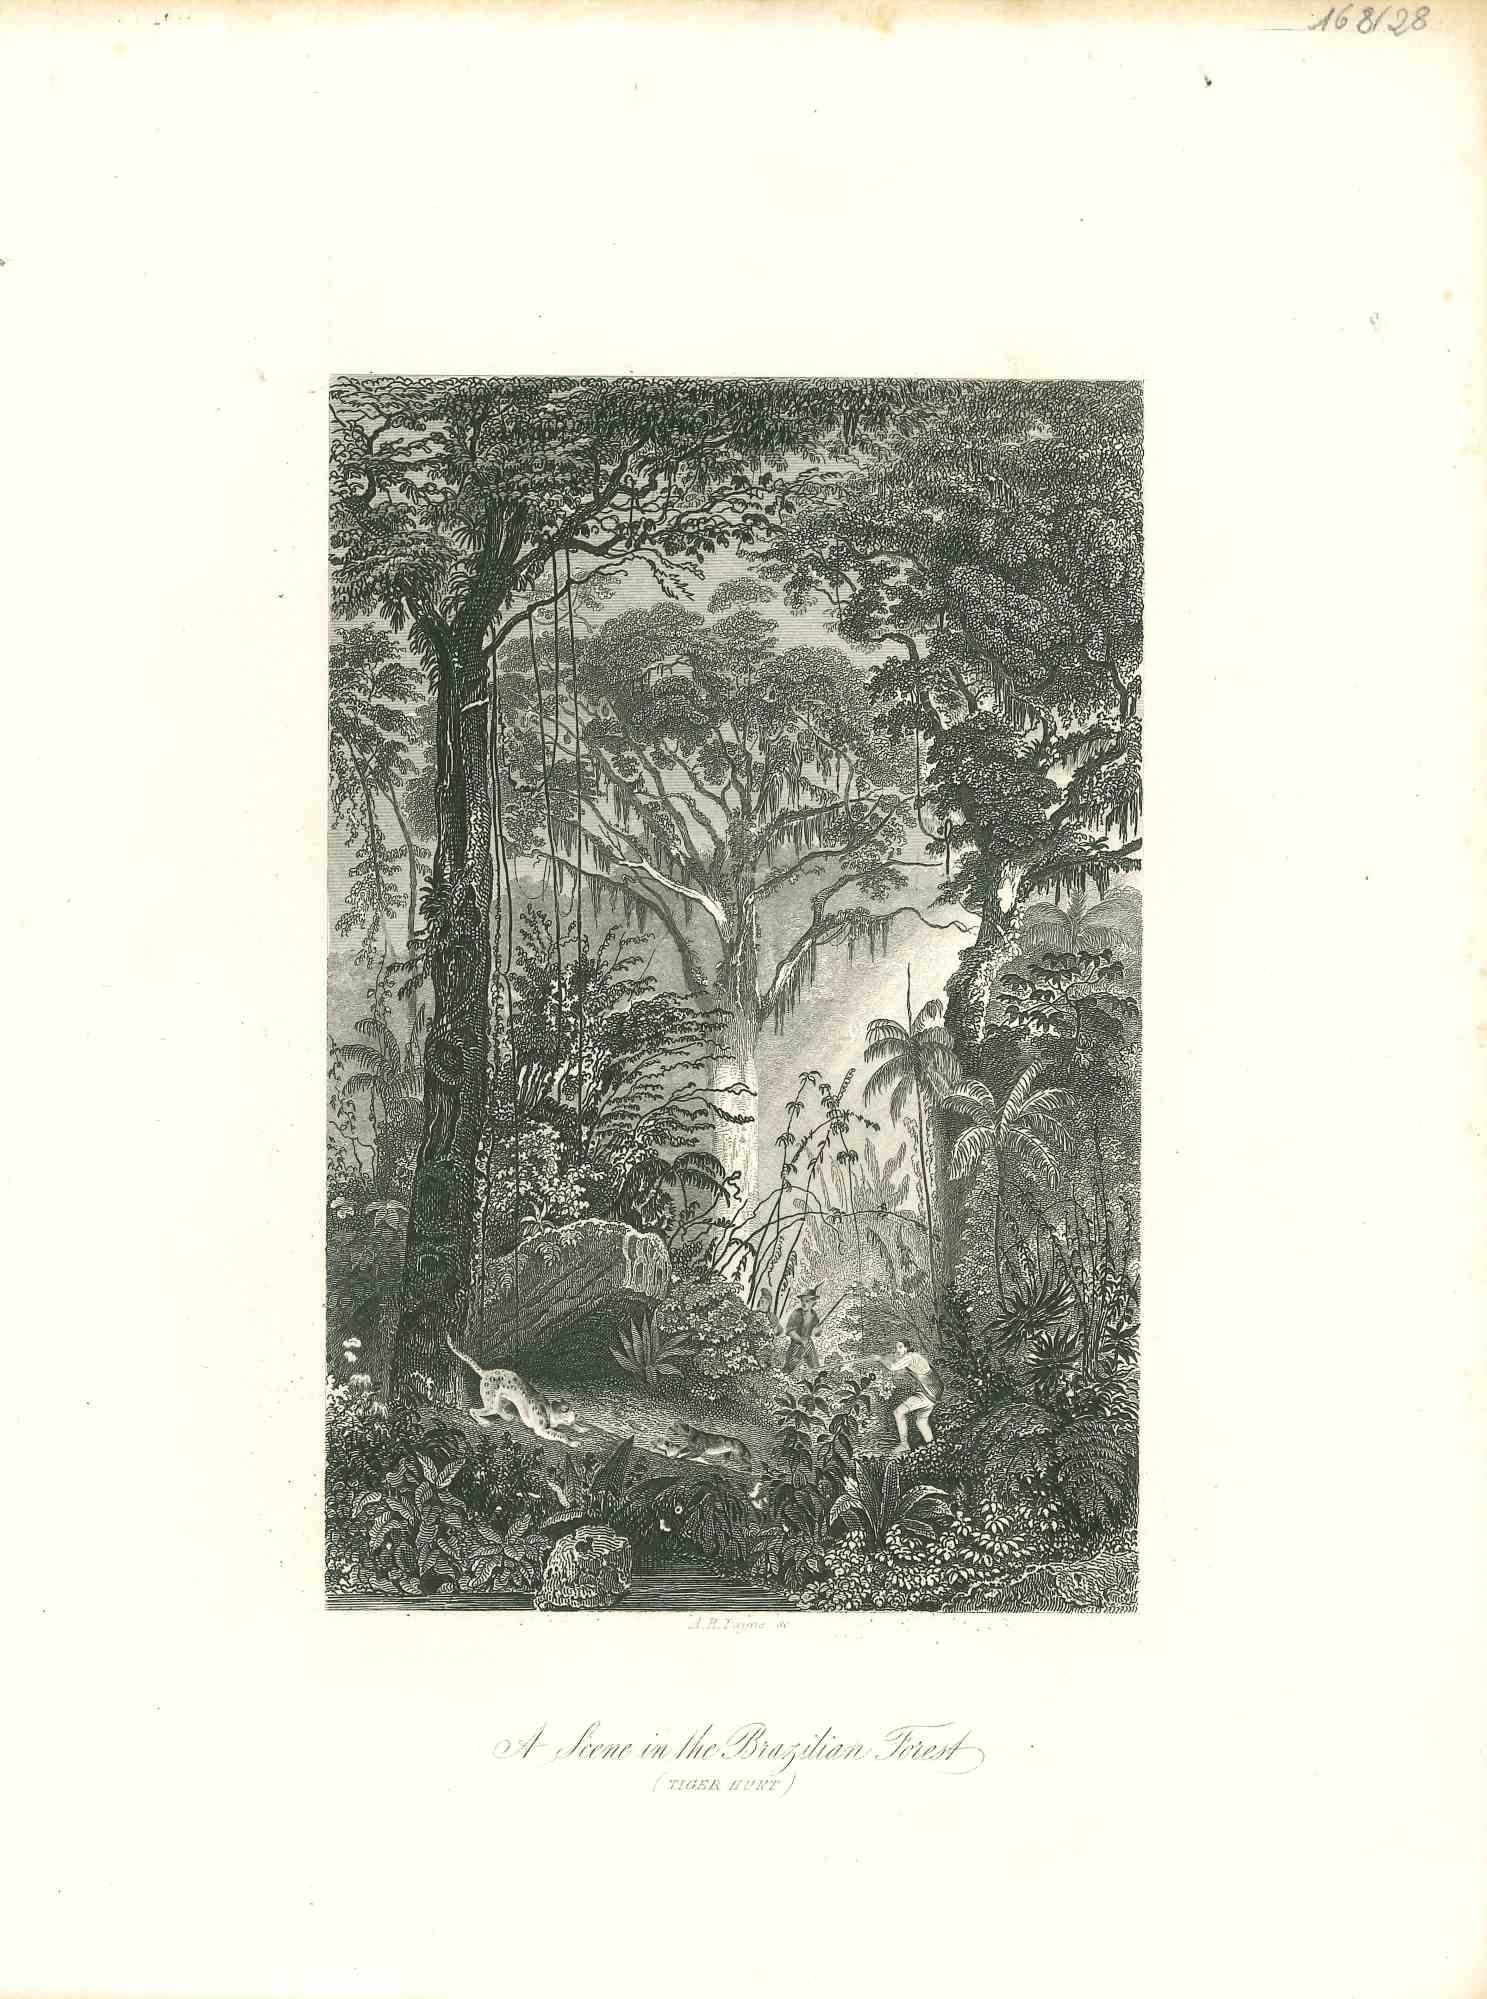 Unknown Figurative Print - In the Brazilian Forest - Original Lithograph - Early 19th Century